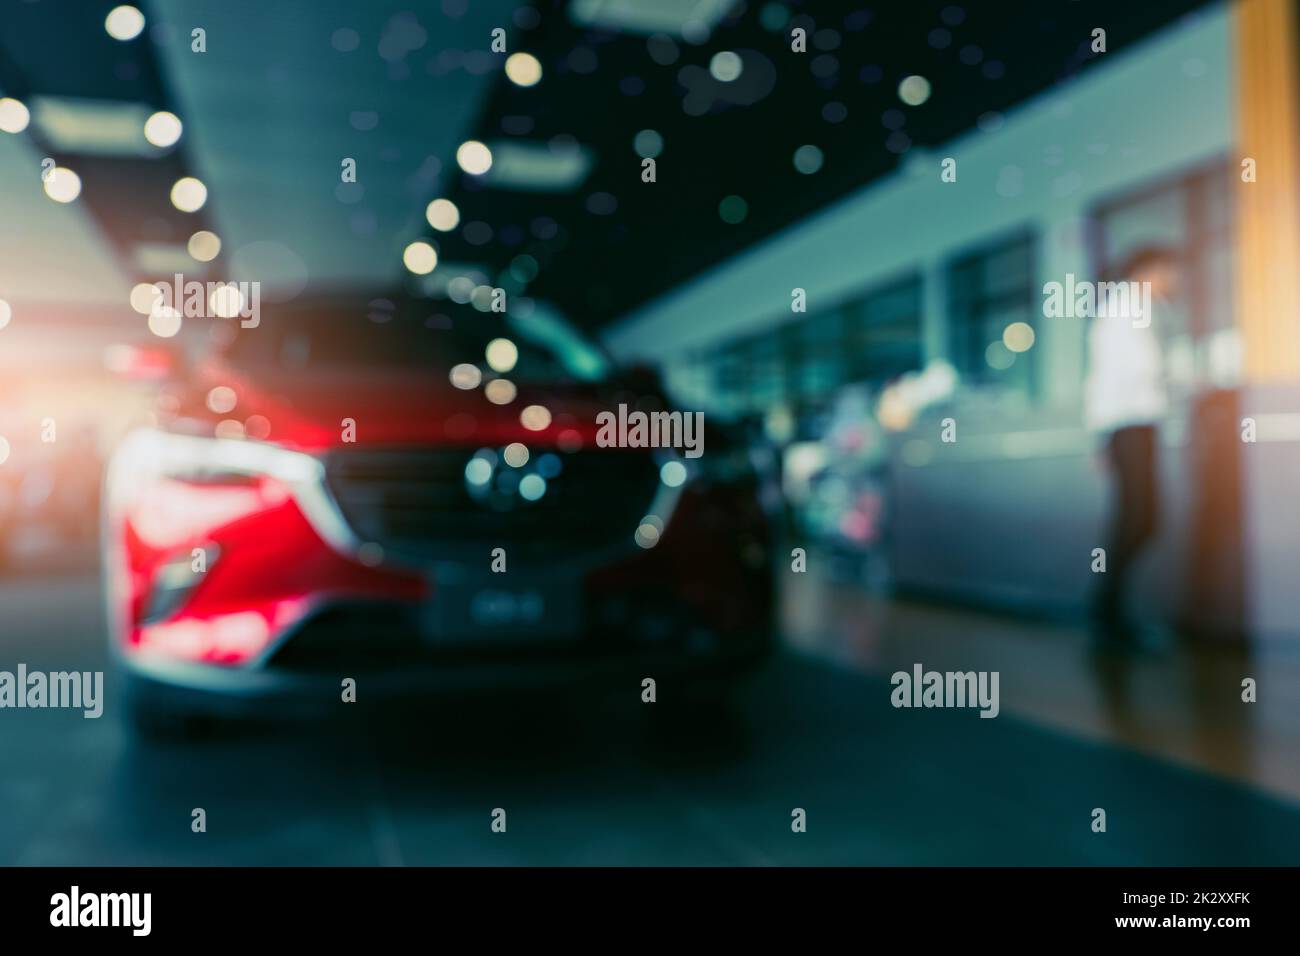 Blurred photo new red car parked in showroom. Car dealership office. Car parked in showroom with care. Auto for sale and rent business. Automobile leasing market. Electric vehicle. Luxury car company. Stock Photo